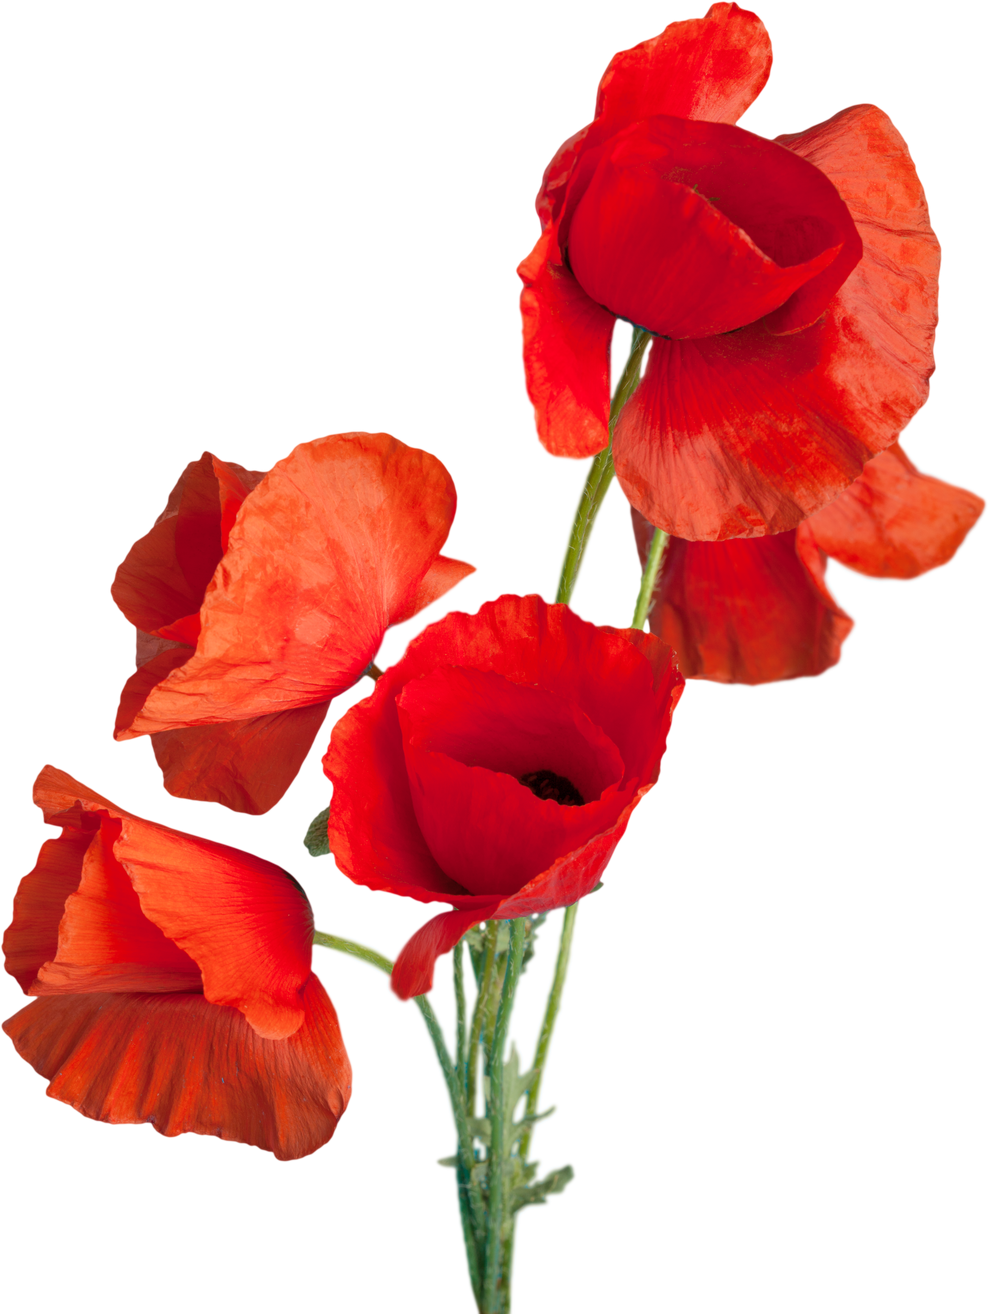 Red Poppy Flowers - Isolated